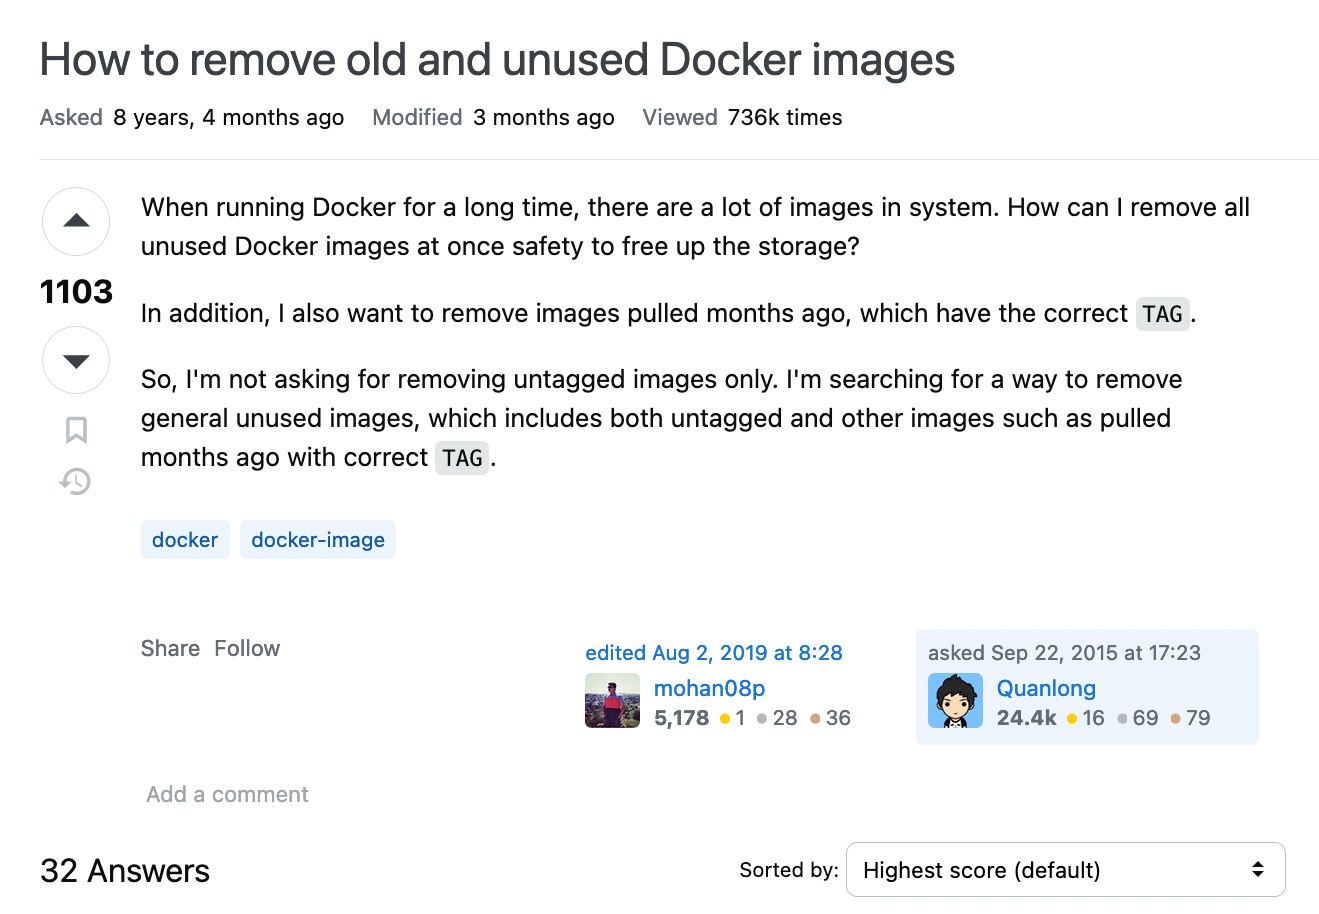 screenshot of Stack Overflow, "How to remove old and unused Docker images Asked 8 years, 4 months ago Modified 3 months ago Viewed 736k times 1103 upvotes  When running Docker for a long time, there are a lot of images in system. How can I remove all unused Docker images at once safety to free up the storage?  In addition, I also want to remove images pulled months ago, which have the correct TAG.  So, I'm not asking for removing untagged images only. I'm searching for a way to remove general unused images, which includes both untagged and other images such as pulled months ago with correct TAG."